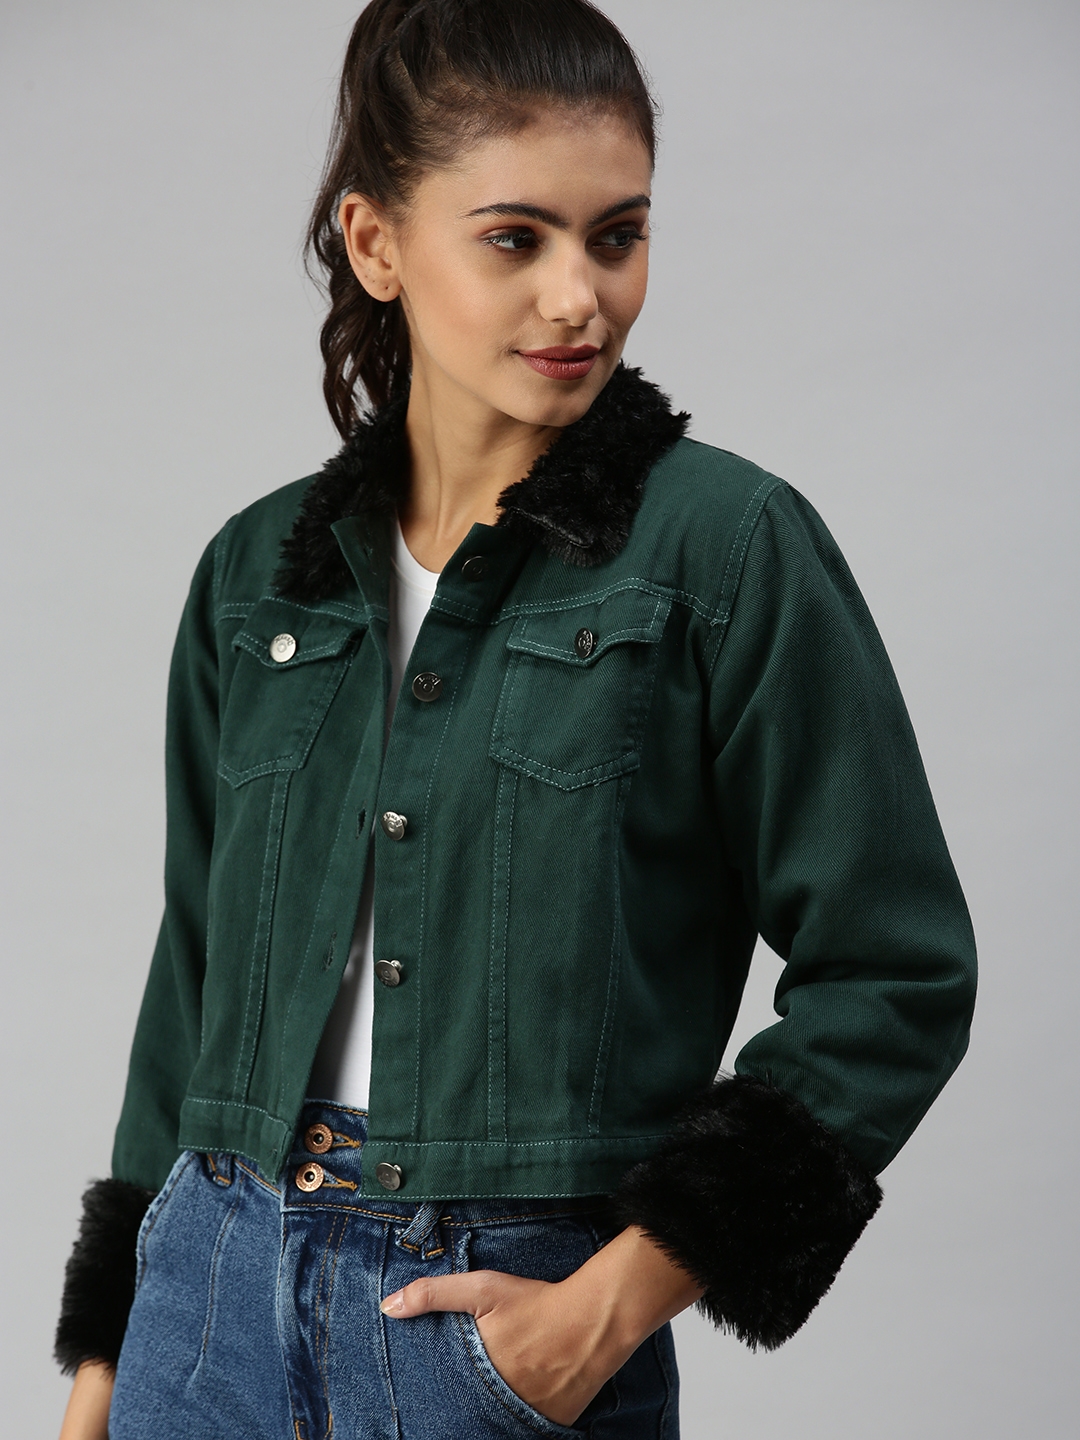 SHOWOFF Women's Spread Collar Long Sleeves Green Solid Jacket